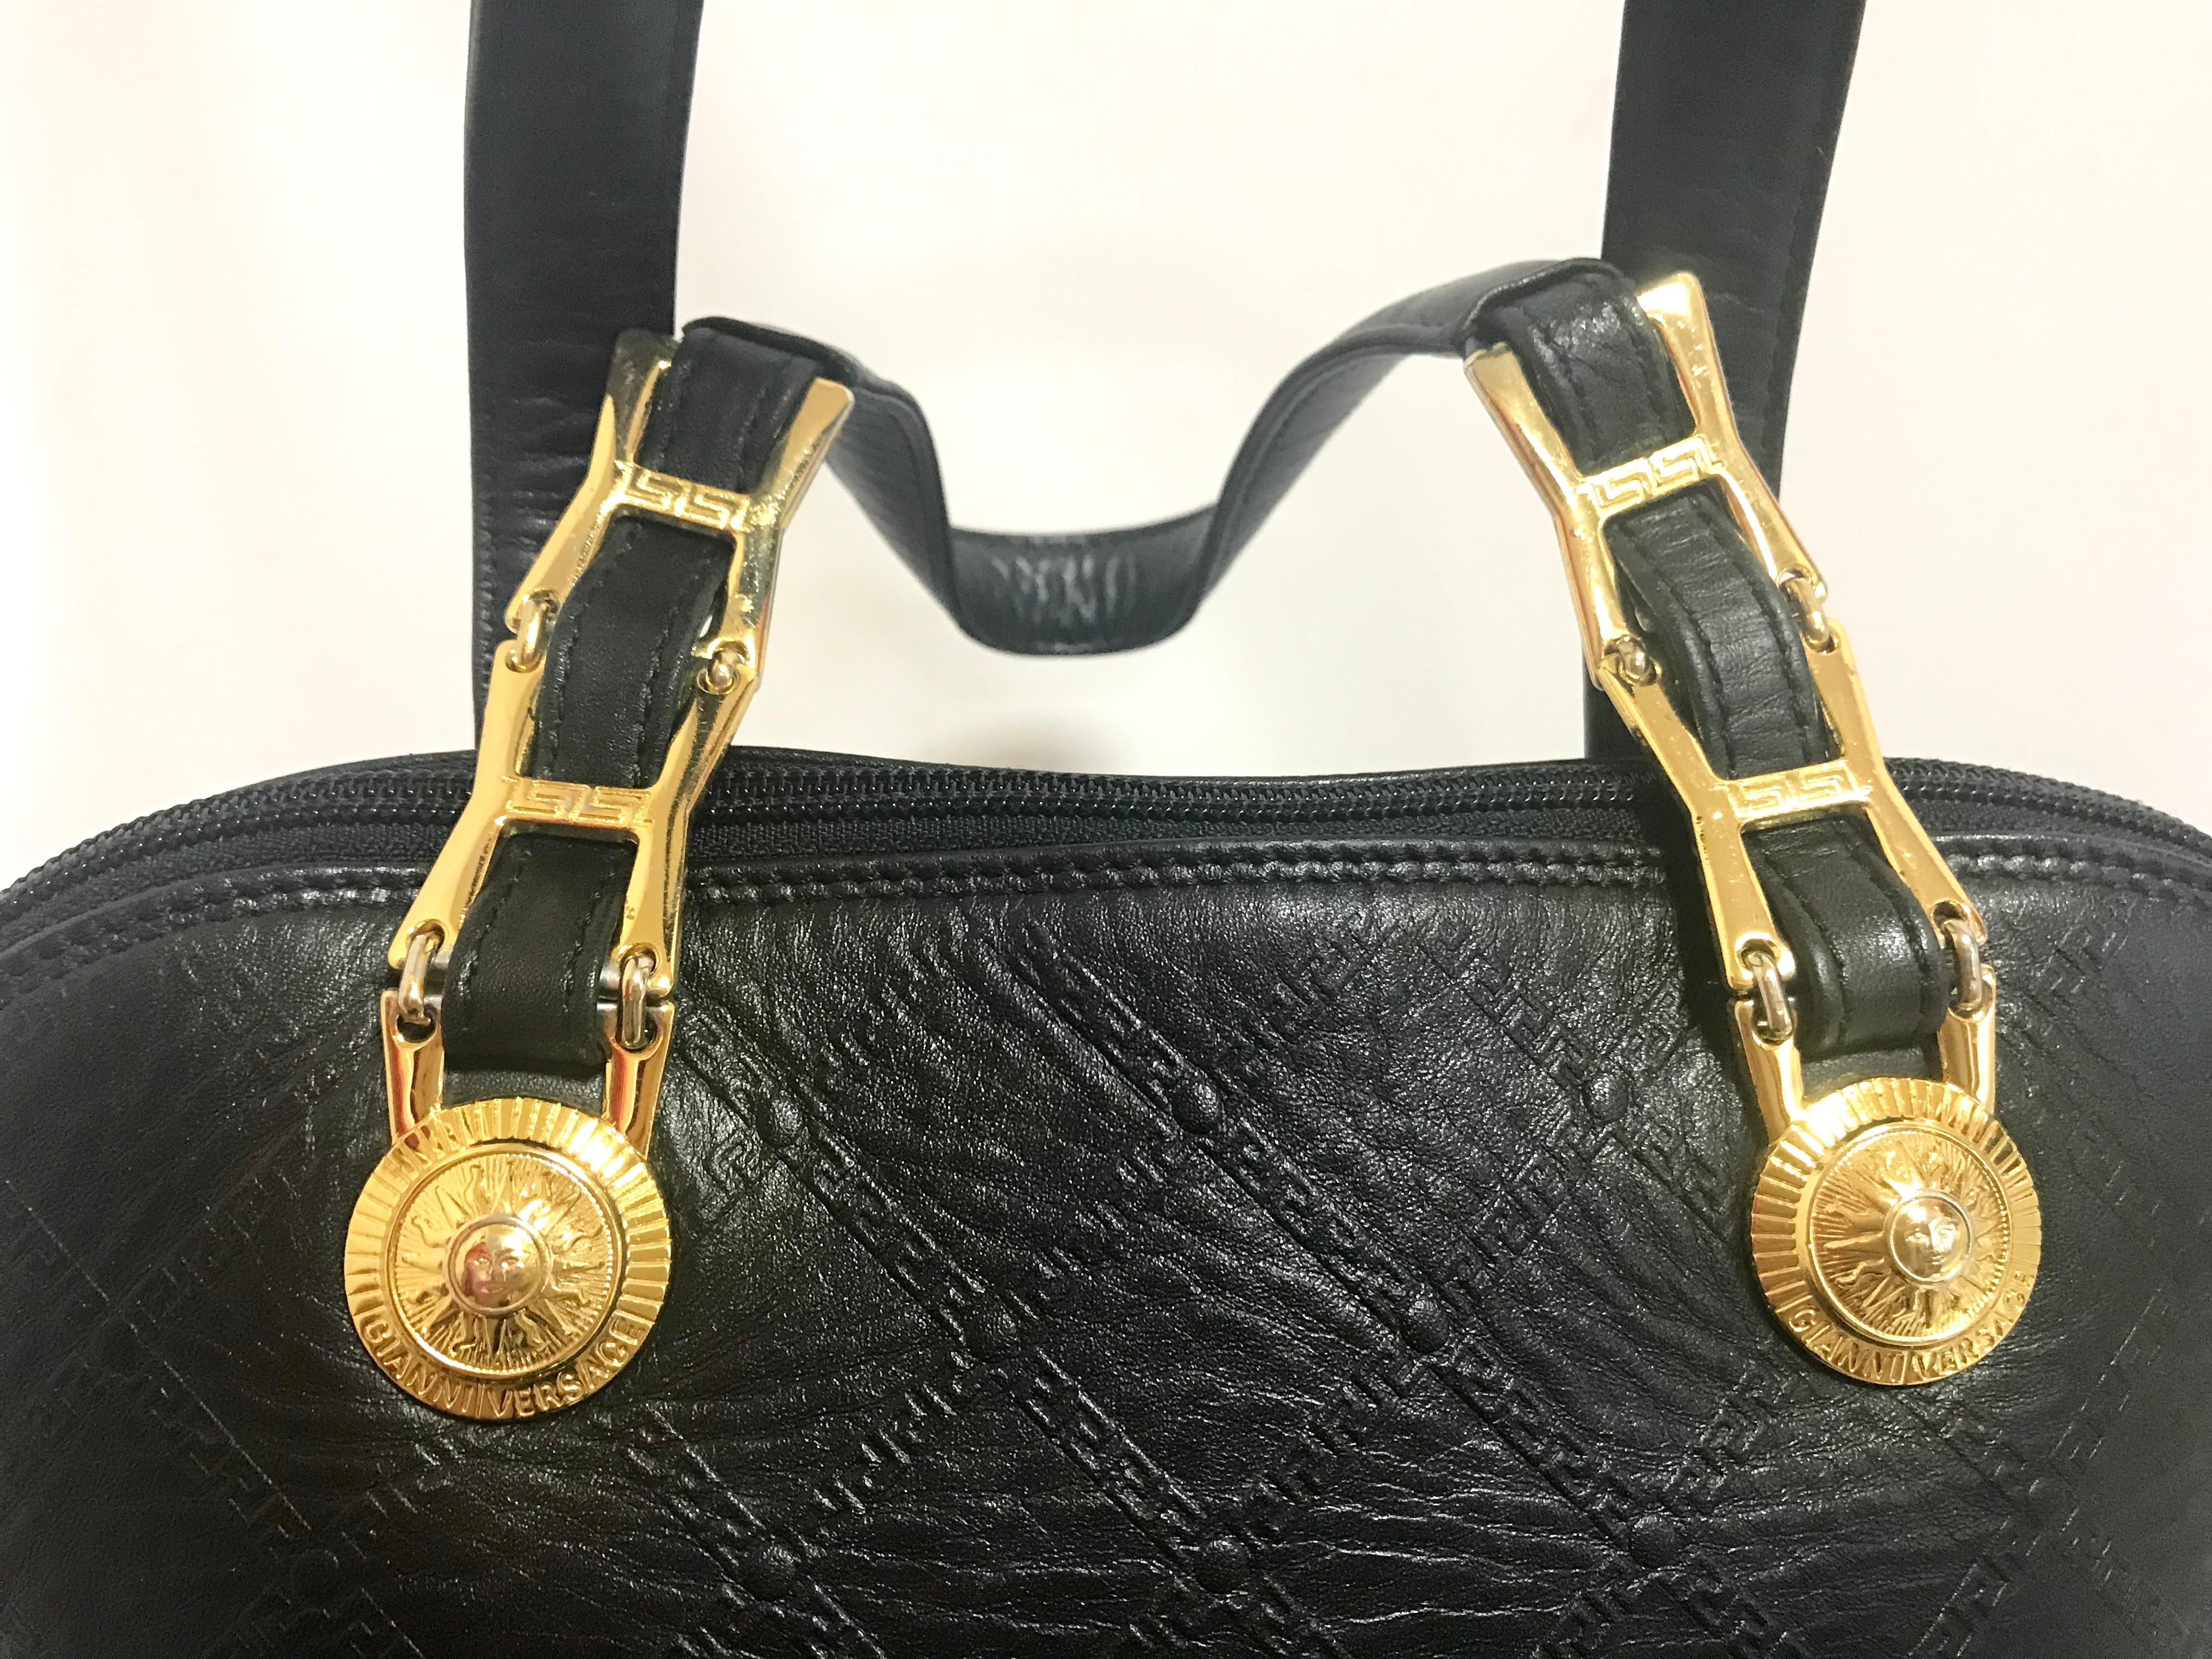 Gianni Versace Vintage black bolide shape bag with a tassel and sunburst motifs  In Good Condition For Sale In Kashiwa, Chiba